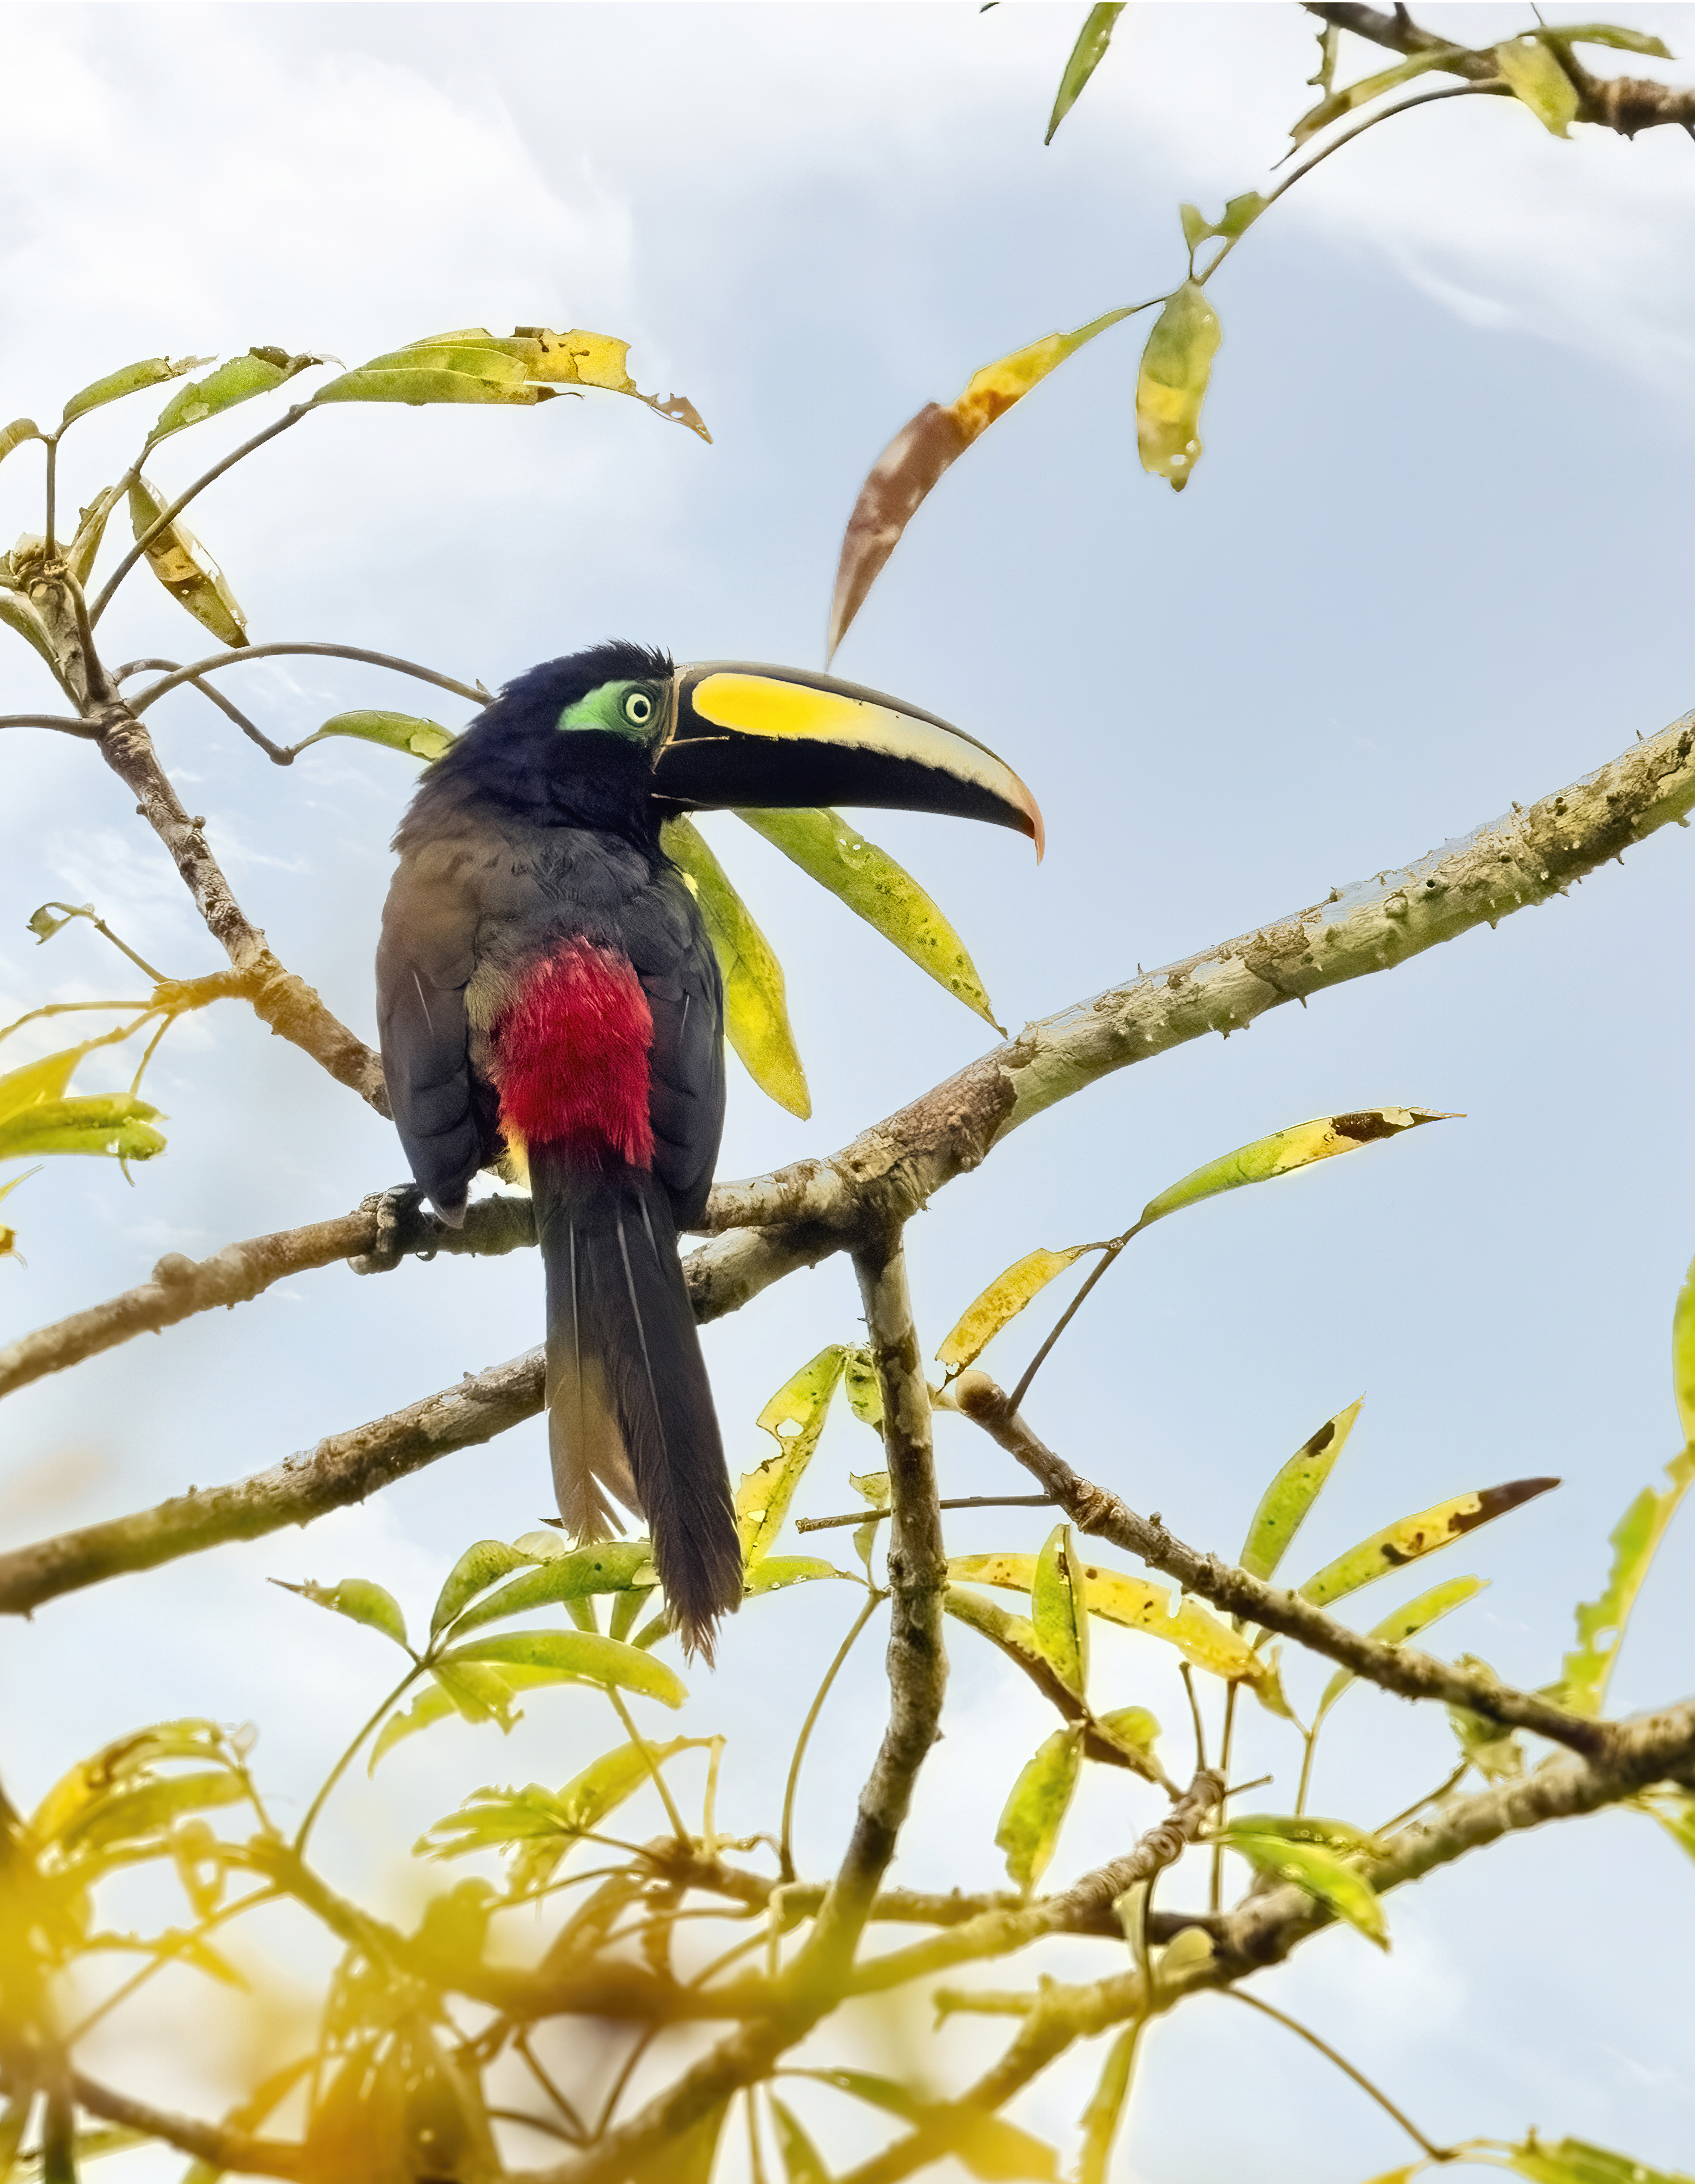 This wil toucan, subject of wildlife photography and bird photography was photographed on a destination photography workshop in the Amazon Rainforest by Tamara Lackey with a nikon z9. This workshop was taught with joe mcnally, a fellow nikon ambassador.